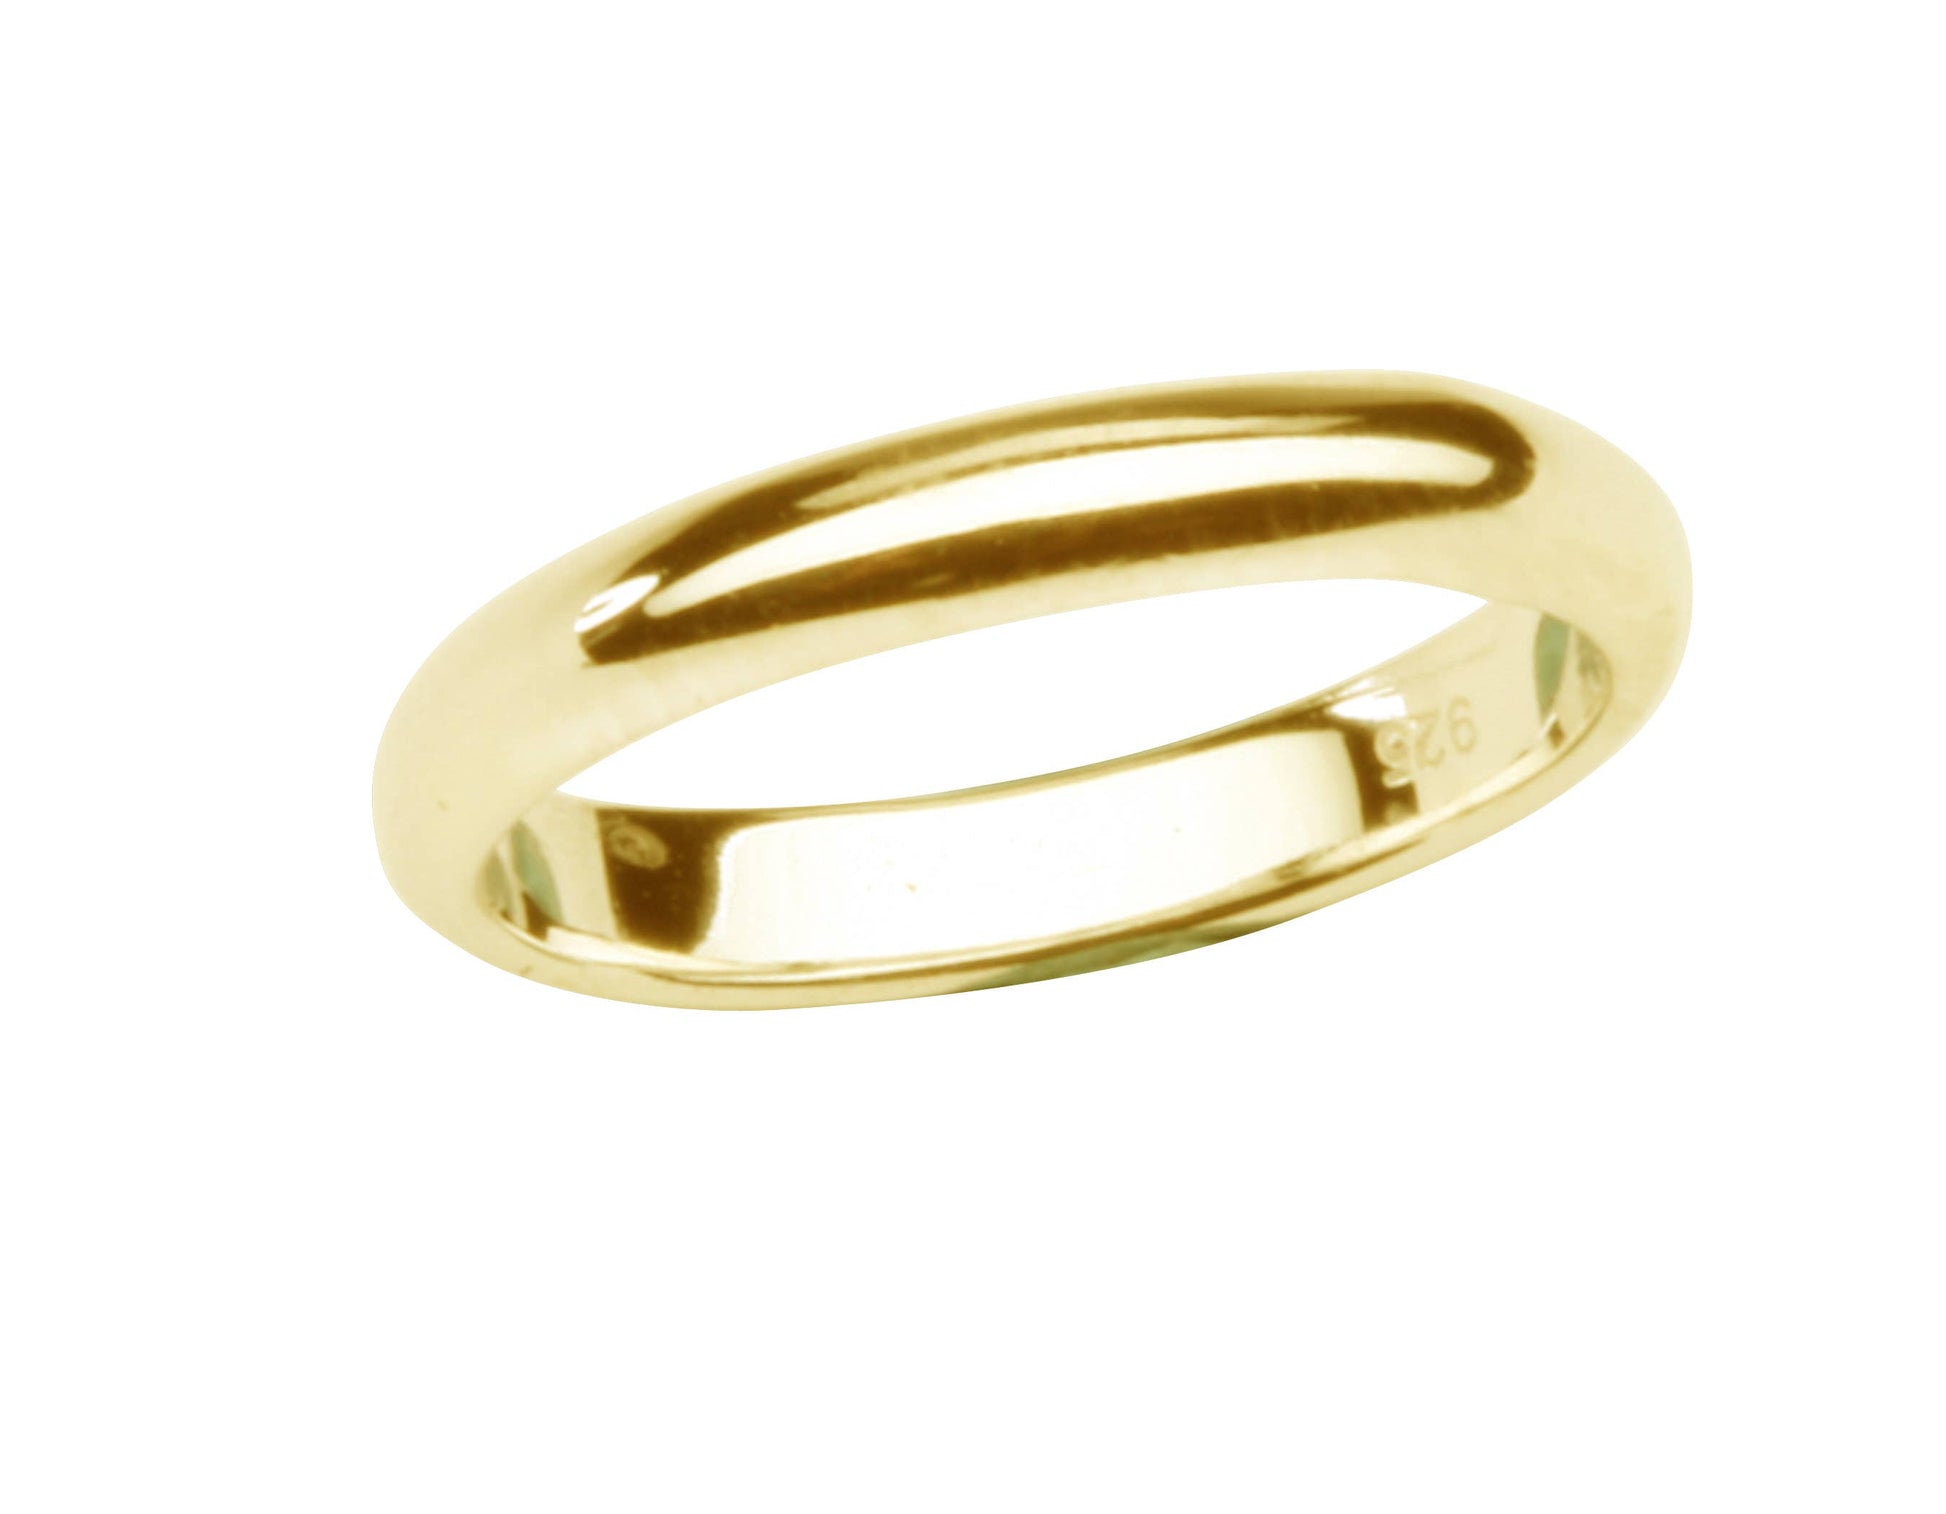 14K Gold-Plated Baby Ring - 2mm Band size 2 Kids Jewelry Cherished Moments   